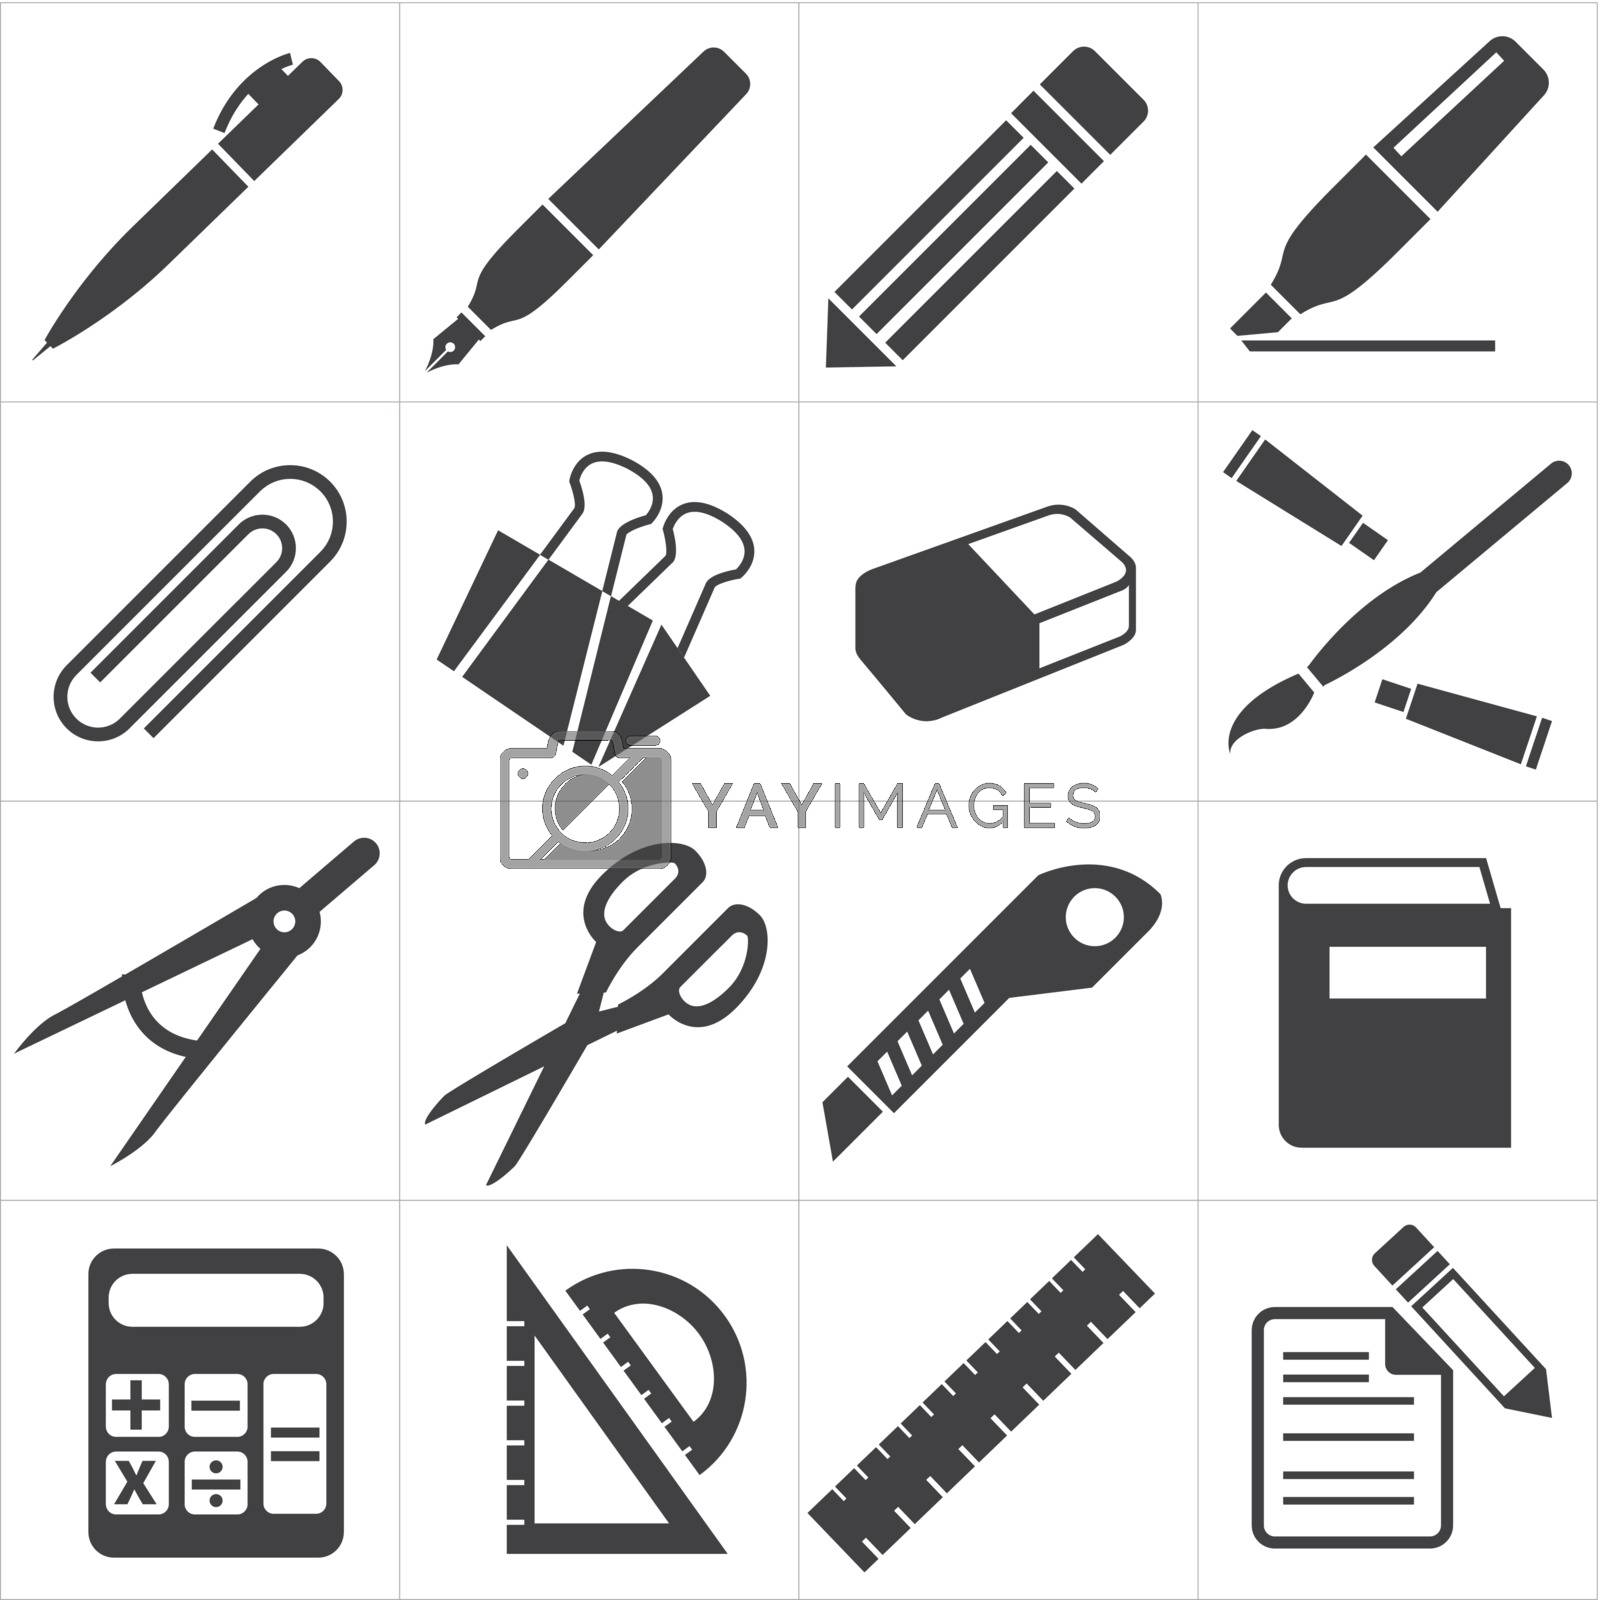 Royalty free image of icon stationary education by kaisorn